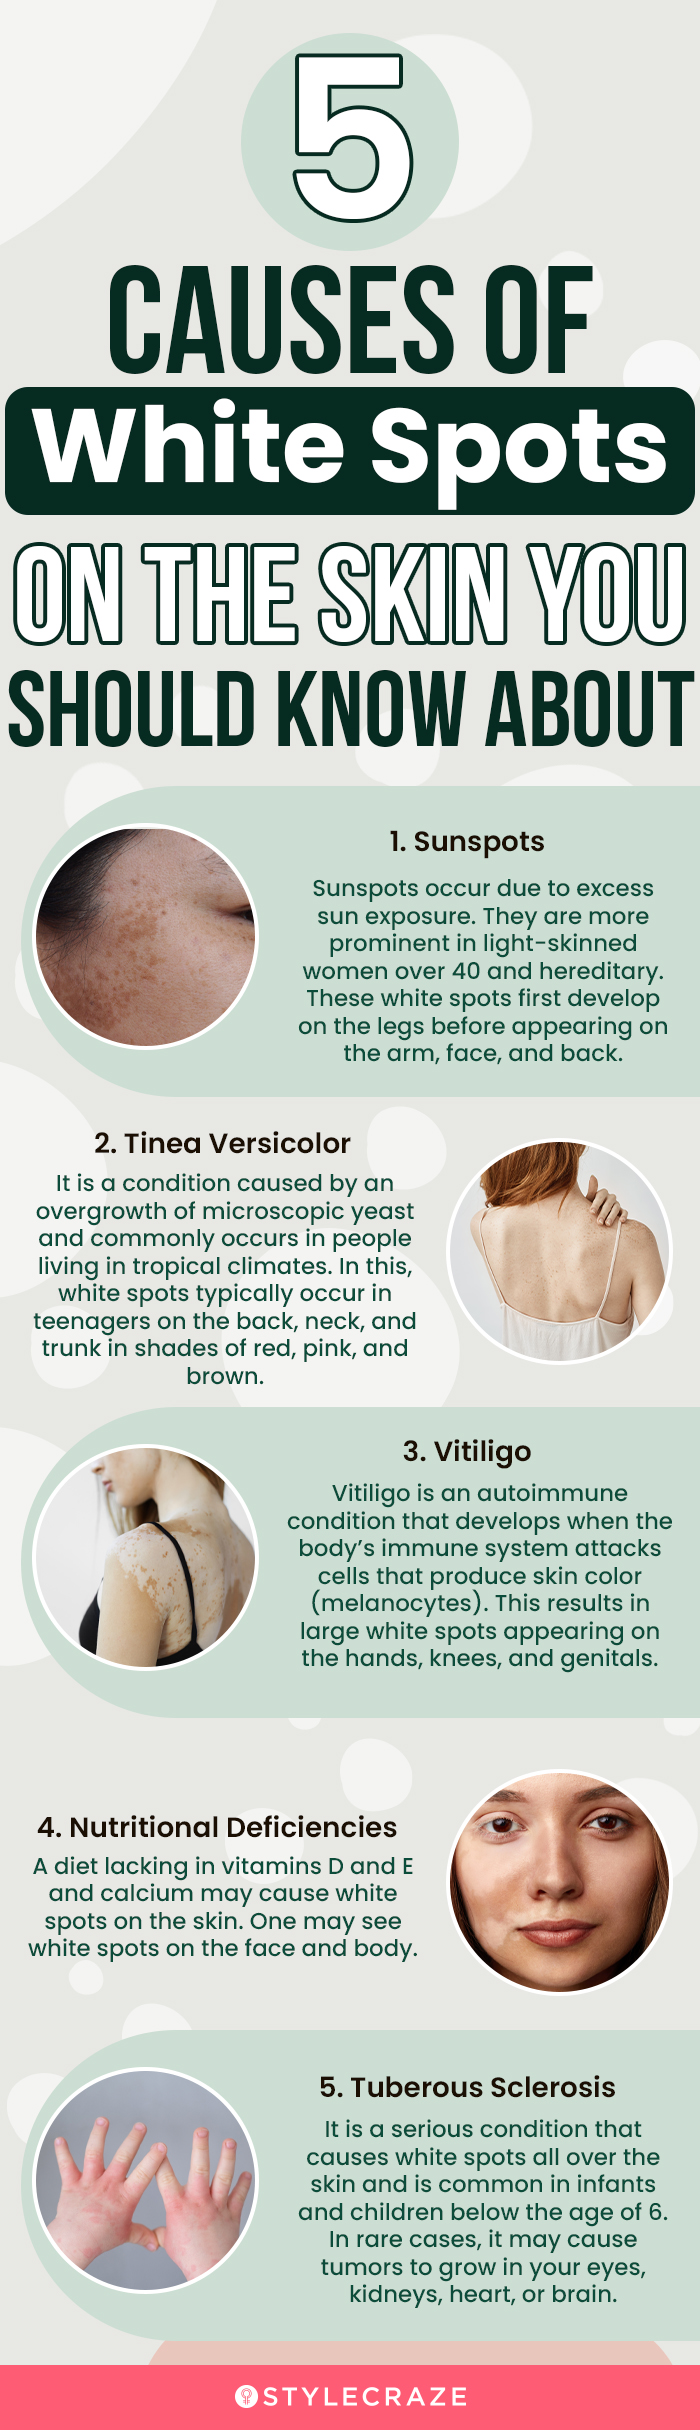 5 causes of white spots on skin you should know about (infographic)